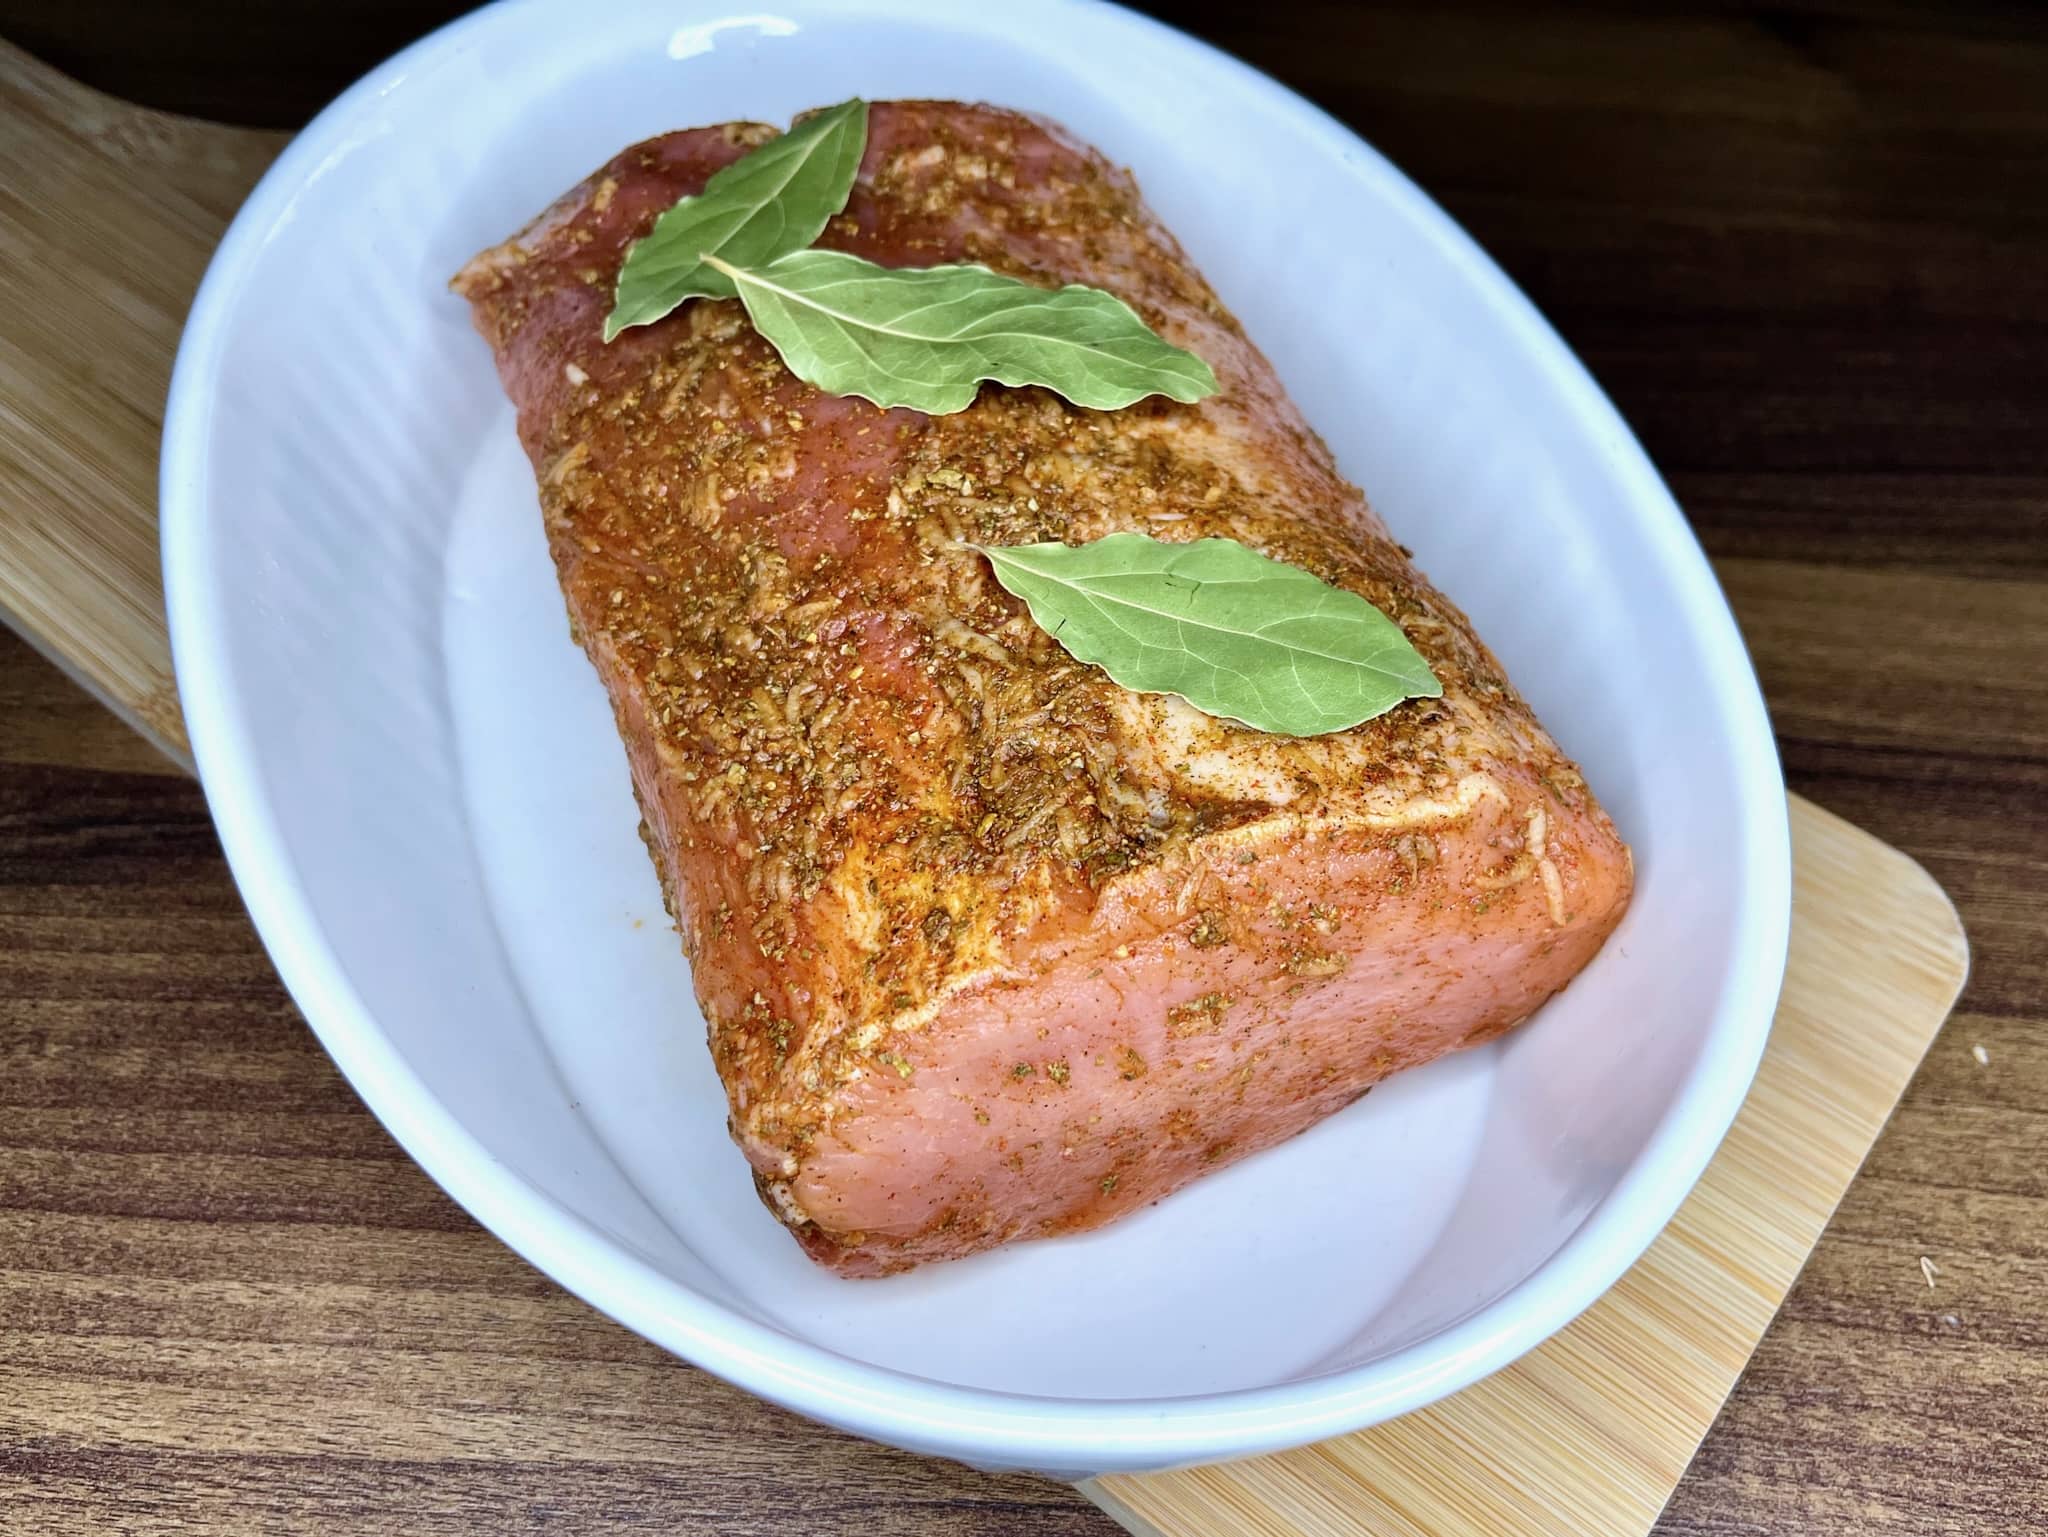 Fresh pork loin rubbed in spices